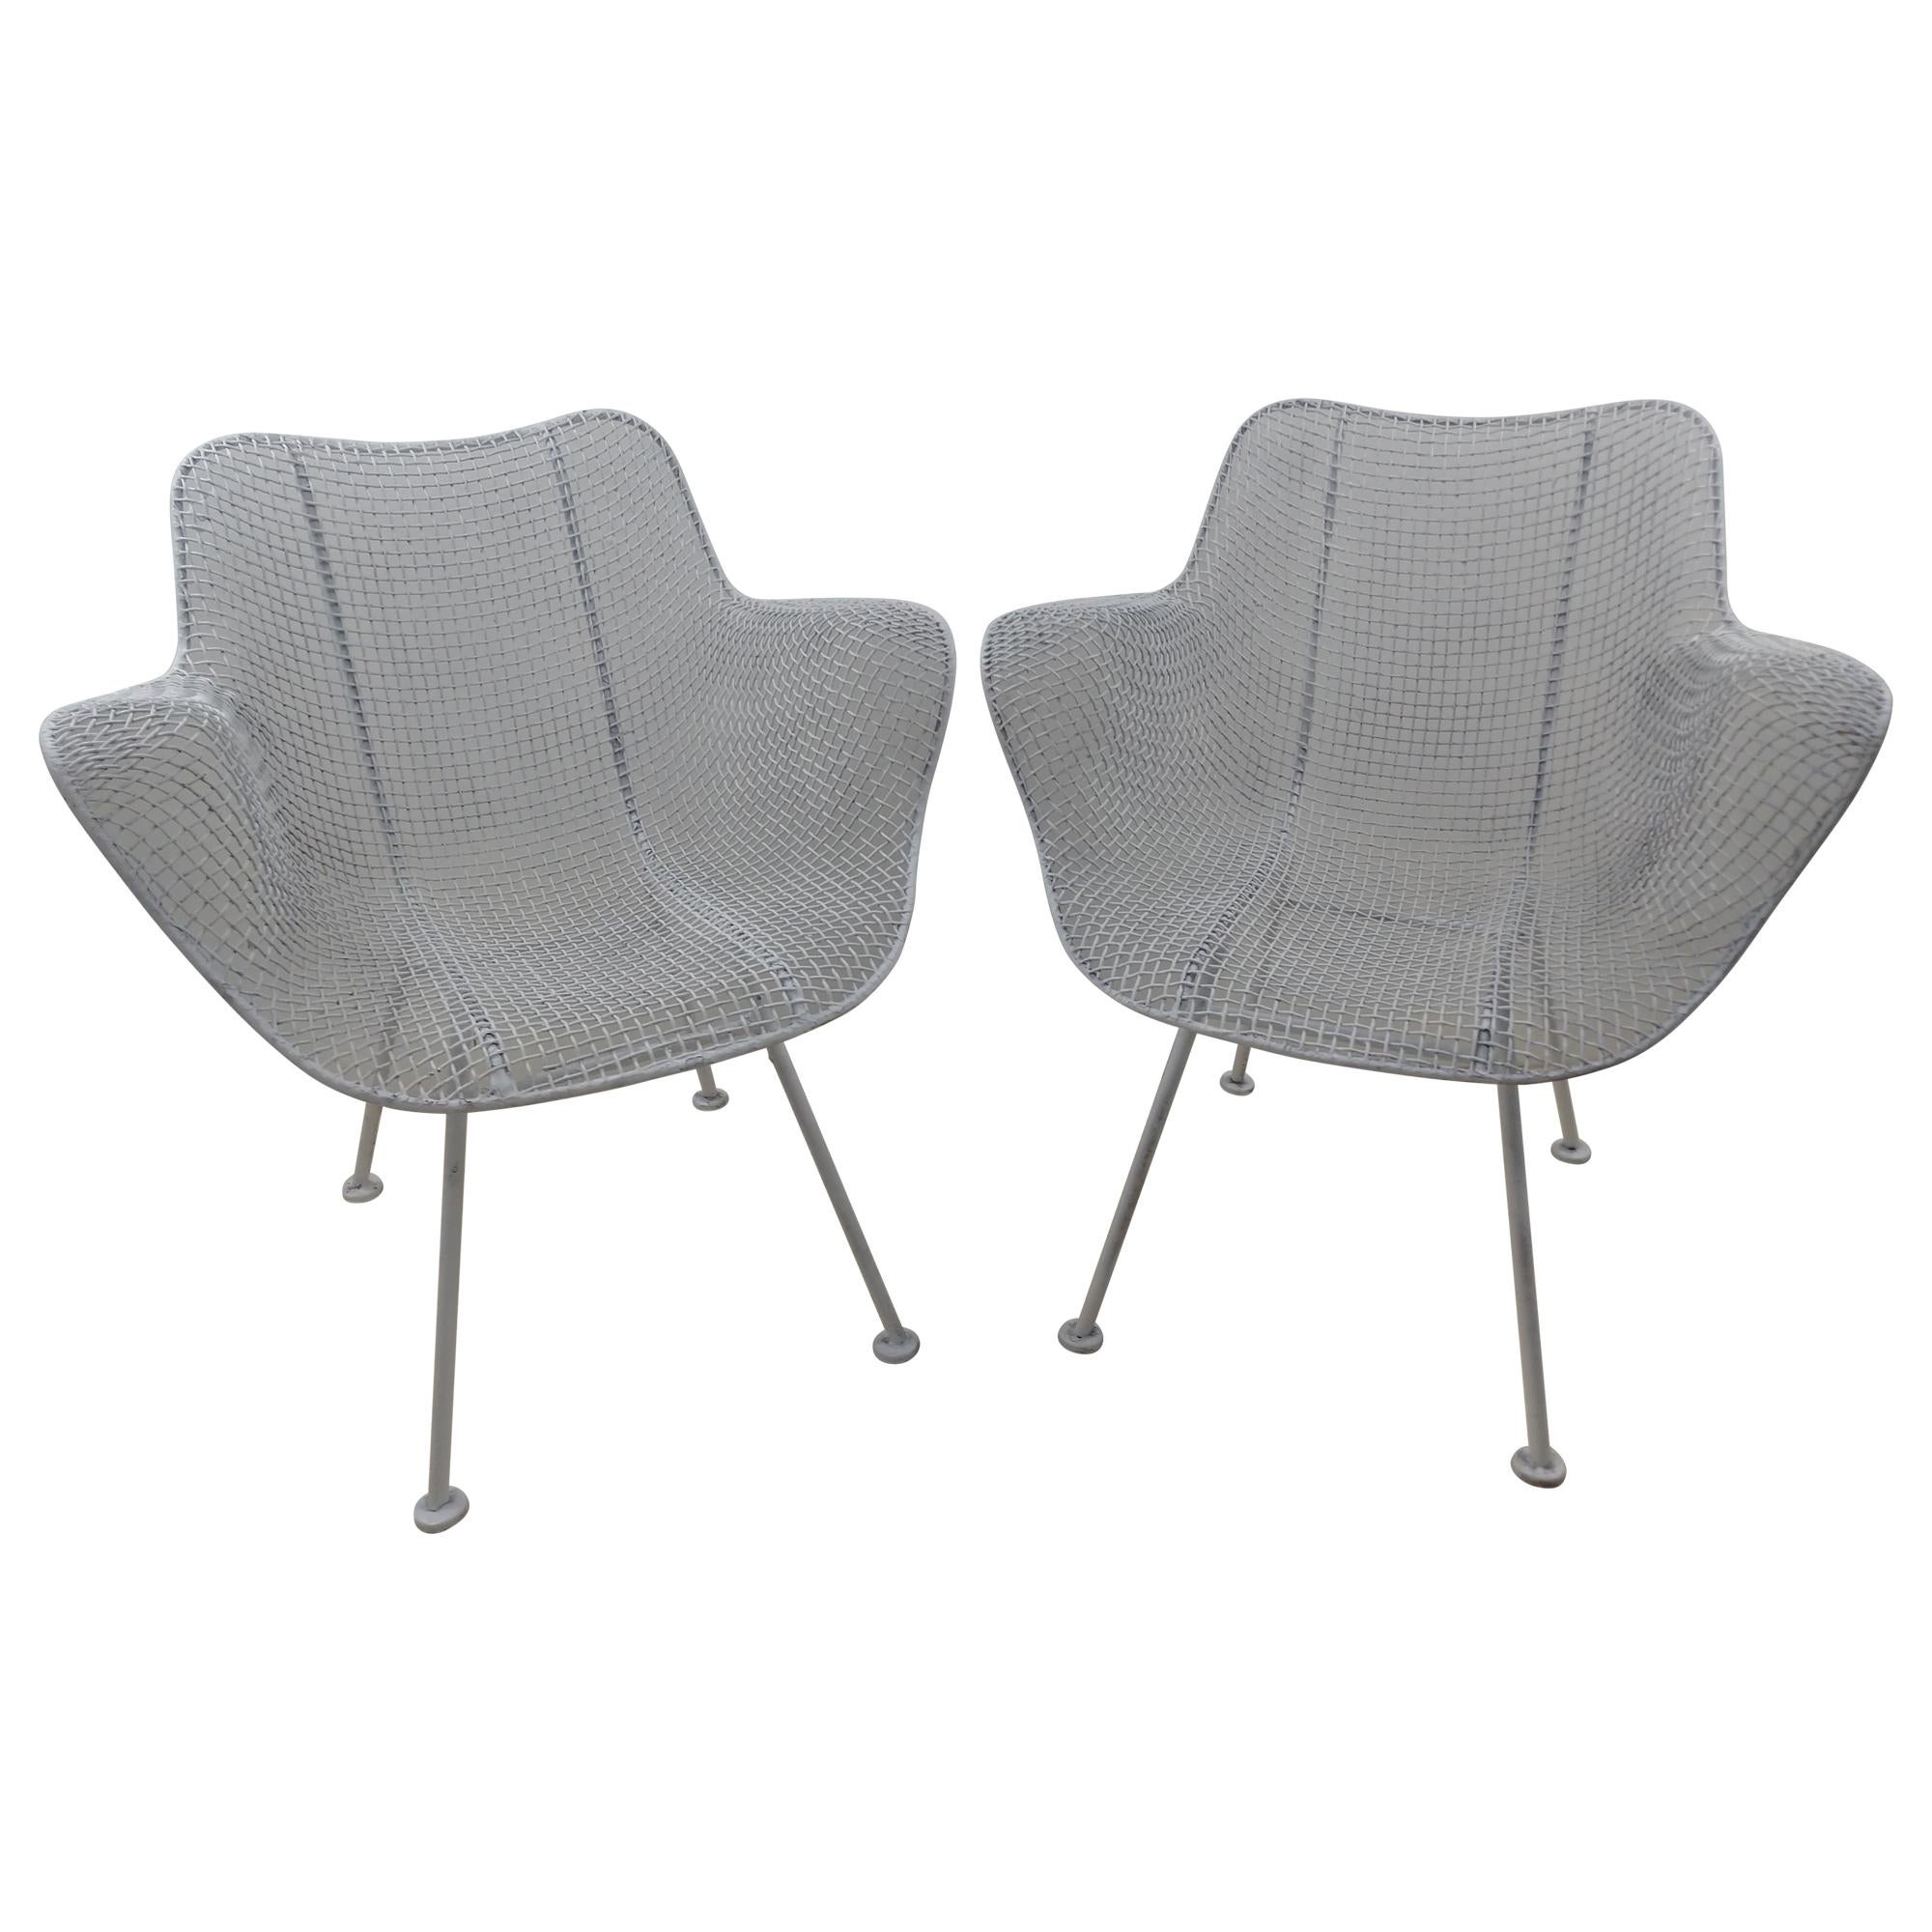 Pair of Mid-Century Modern Sculptural Armchairs by Russell Woodard, circa 1955